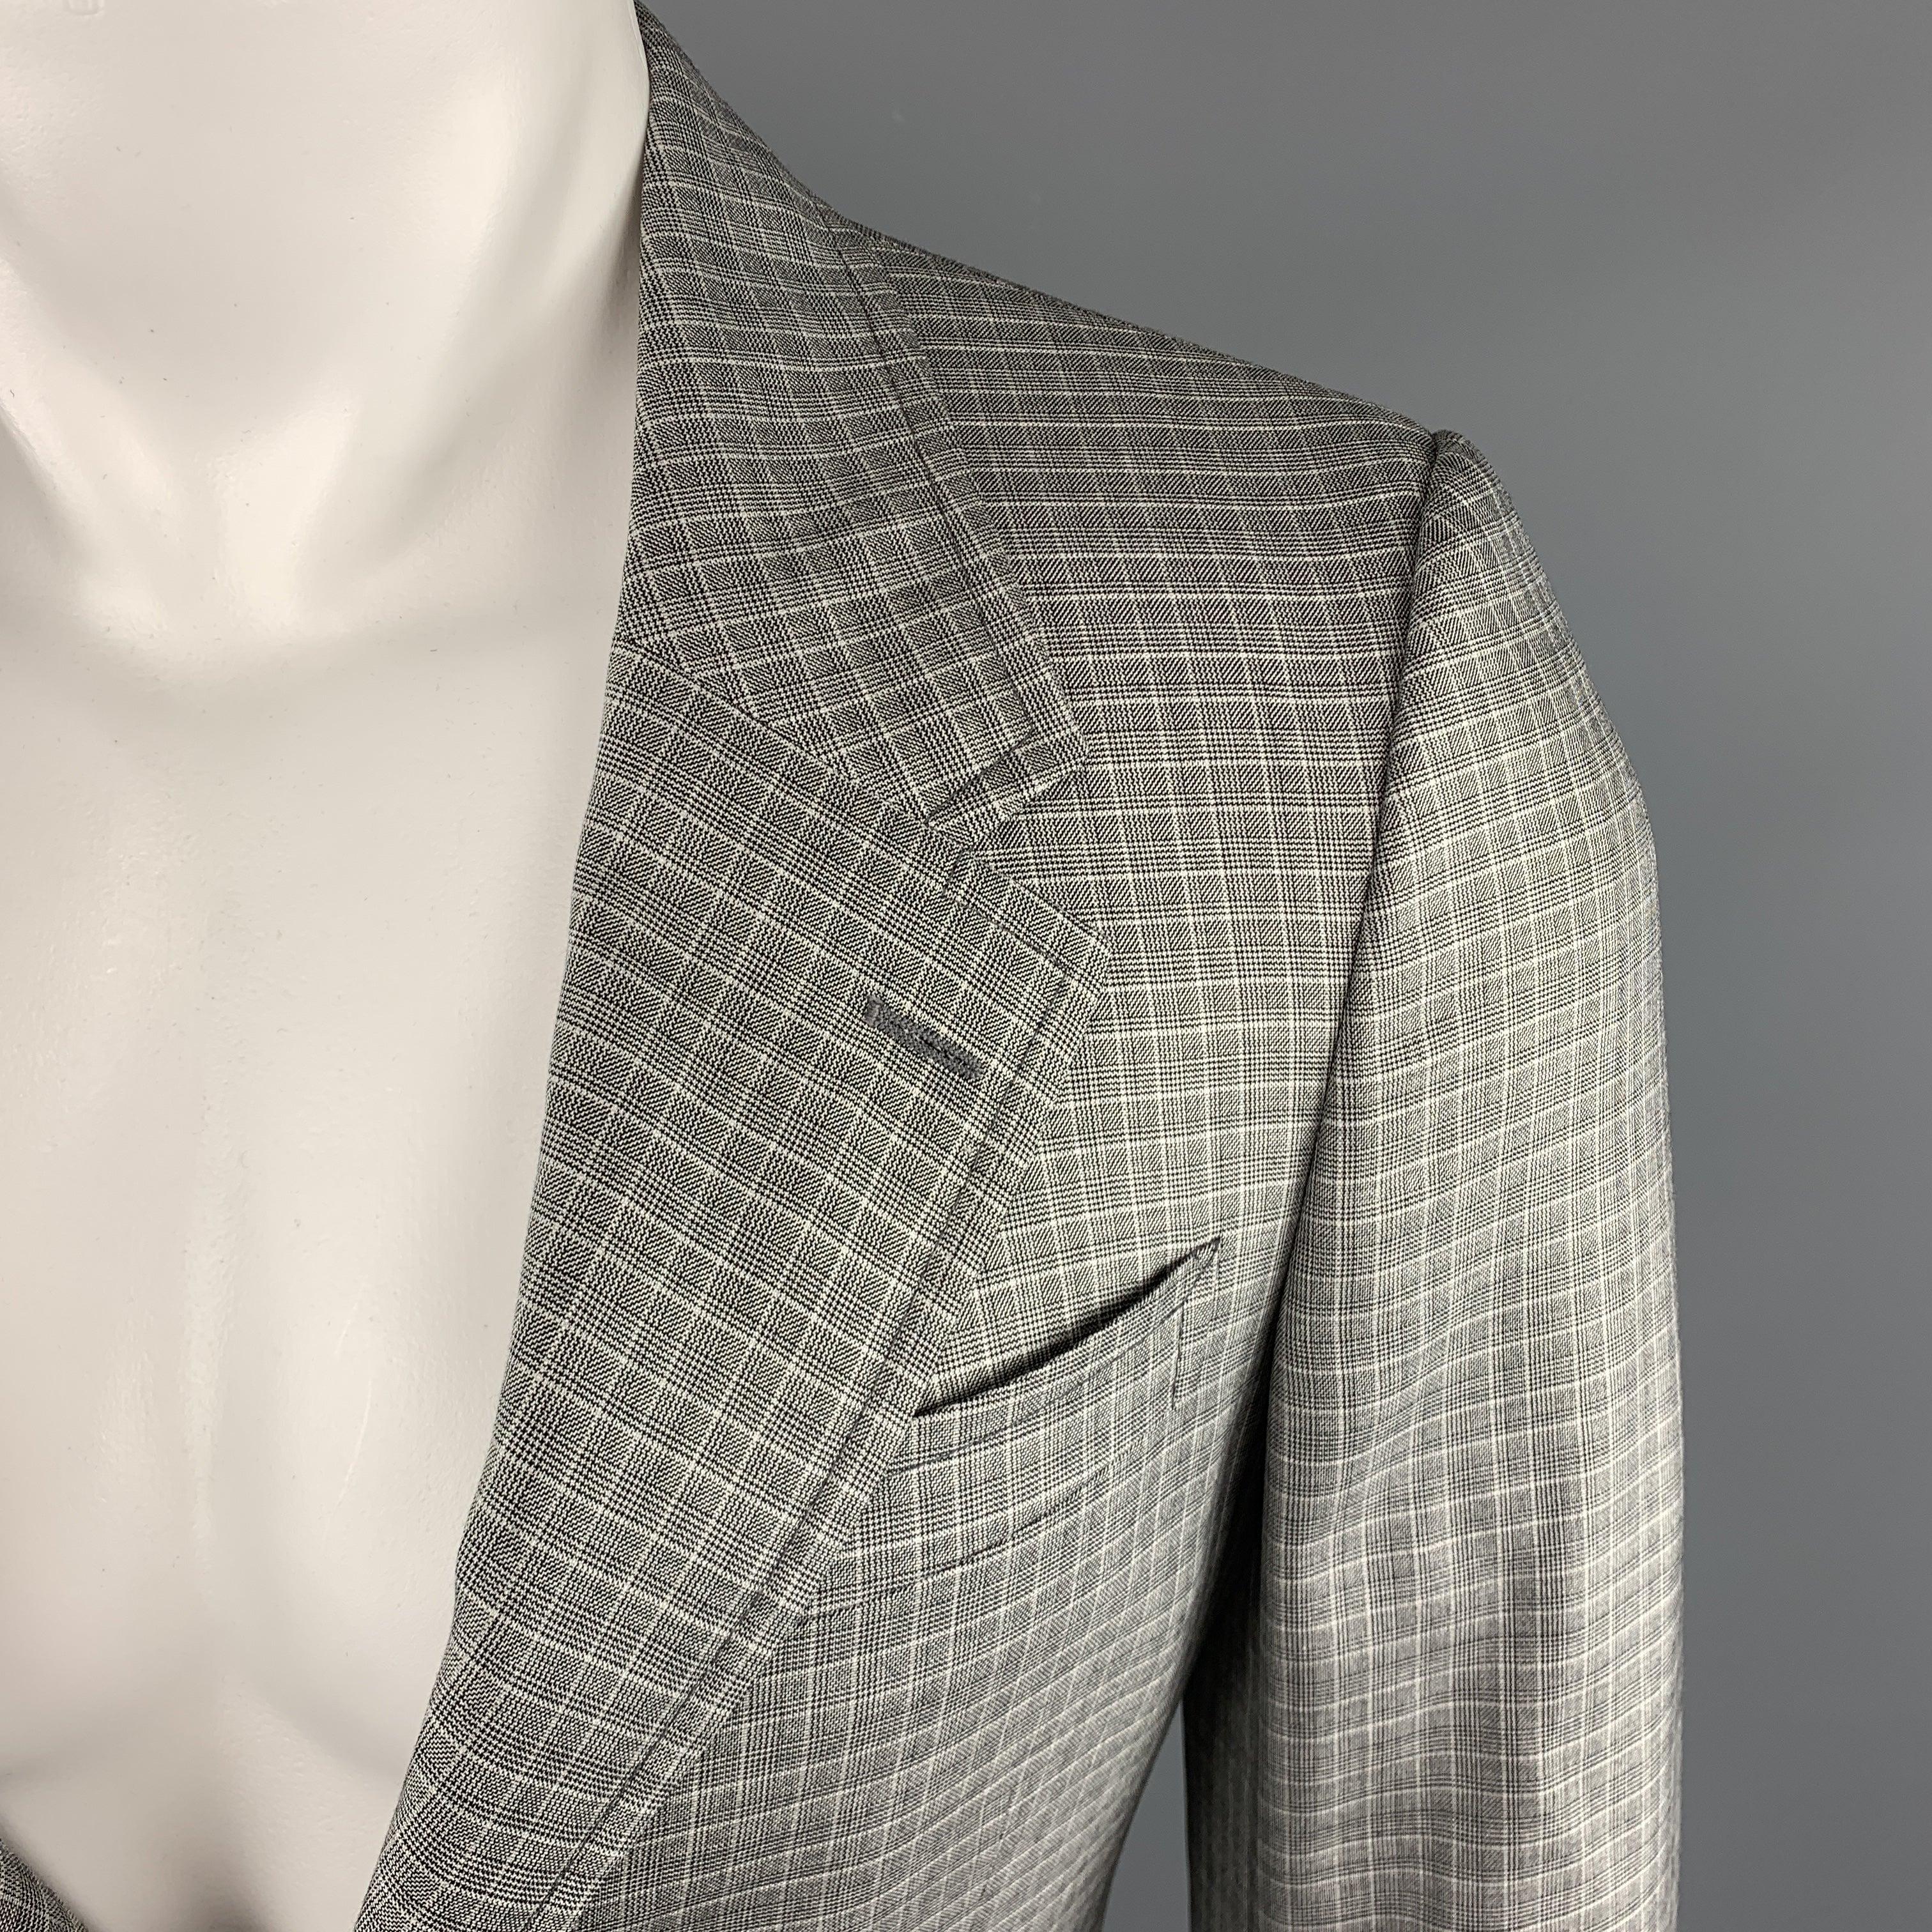 PRADA Sport Coat comes in a grey tone in a plaid wool / silk material, with a notch lapel, slit and flap pockets, two buttons at closure, single breasted, buttoned cuffs, a double vent at back, unlined. Made in Italy. Excellent Pre-Owned Condition.